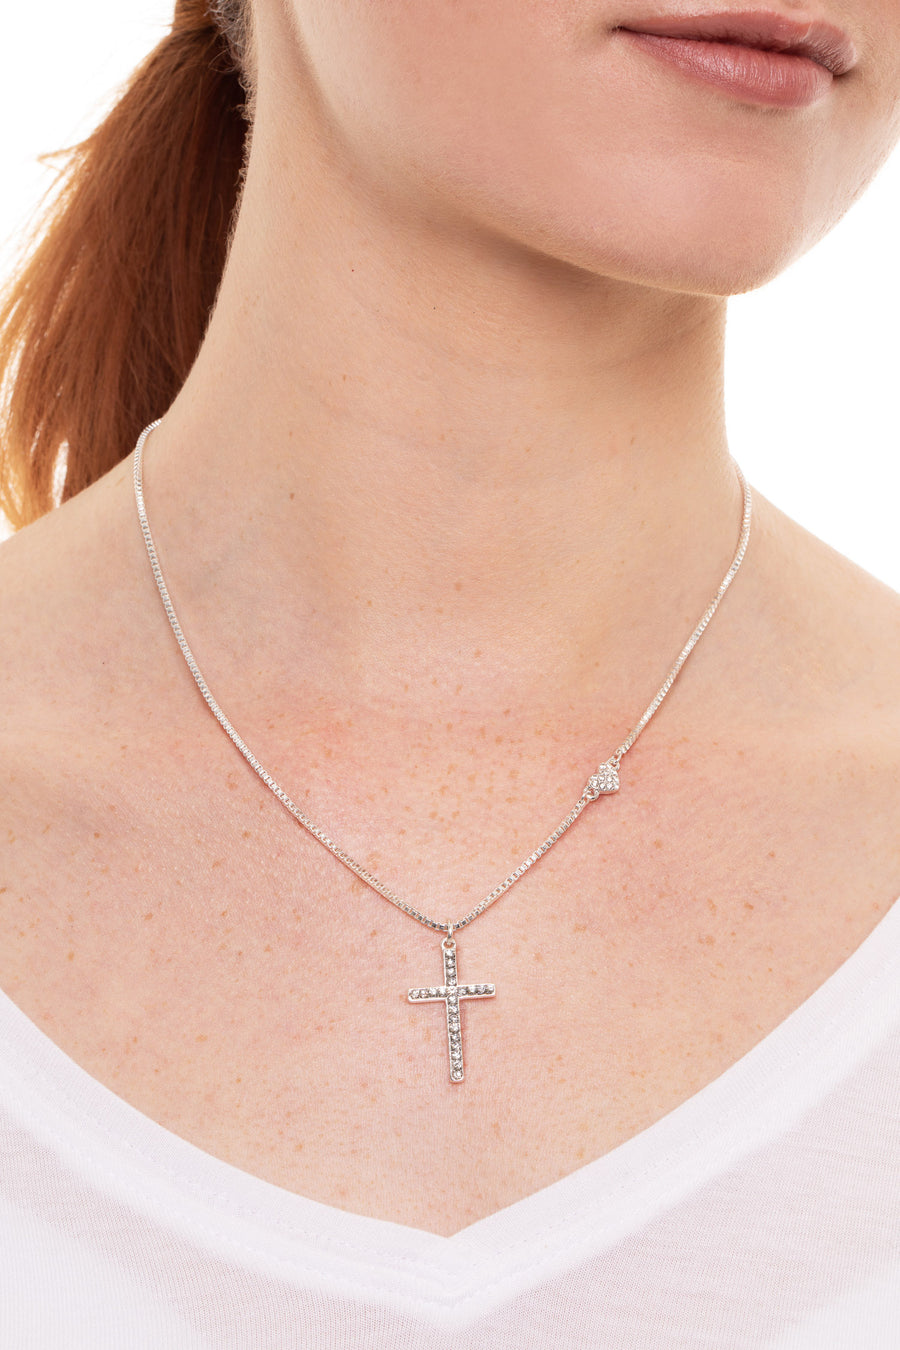 crucifix cross silver heart necklace sparkle chain gift 